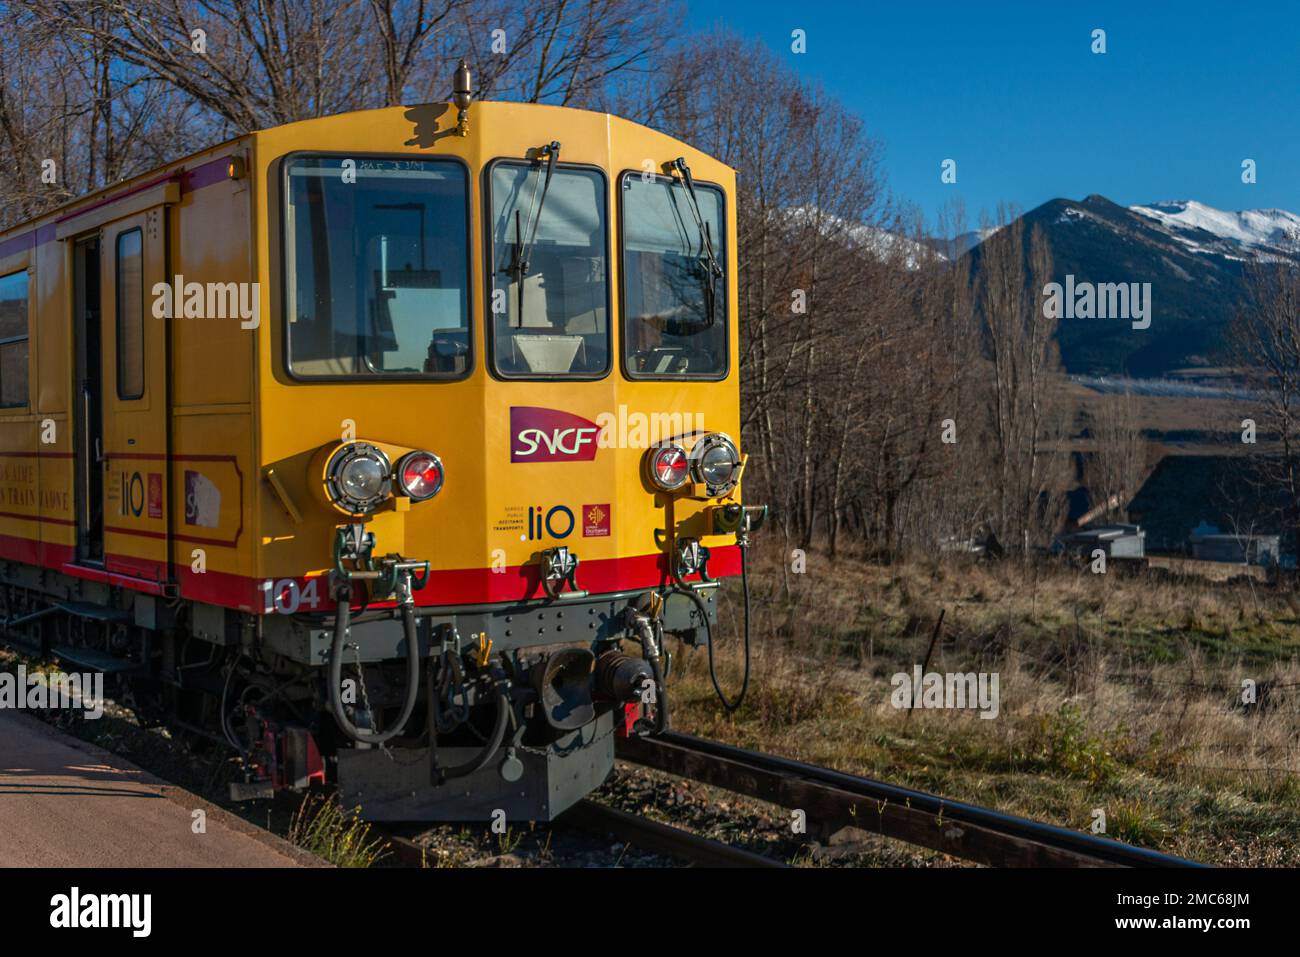 The Yellow train 'Le Train Jaune', here at Font Romeu, in the Pyrenees Orientales region of southern France. Stock Photo